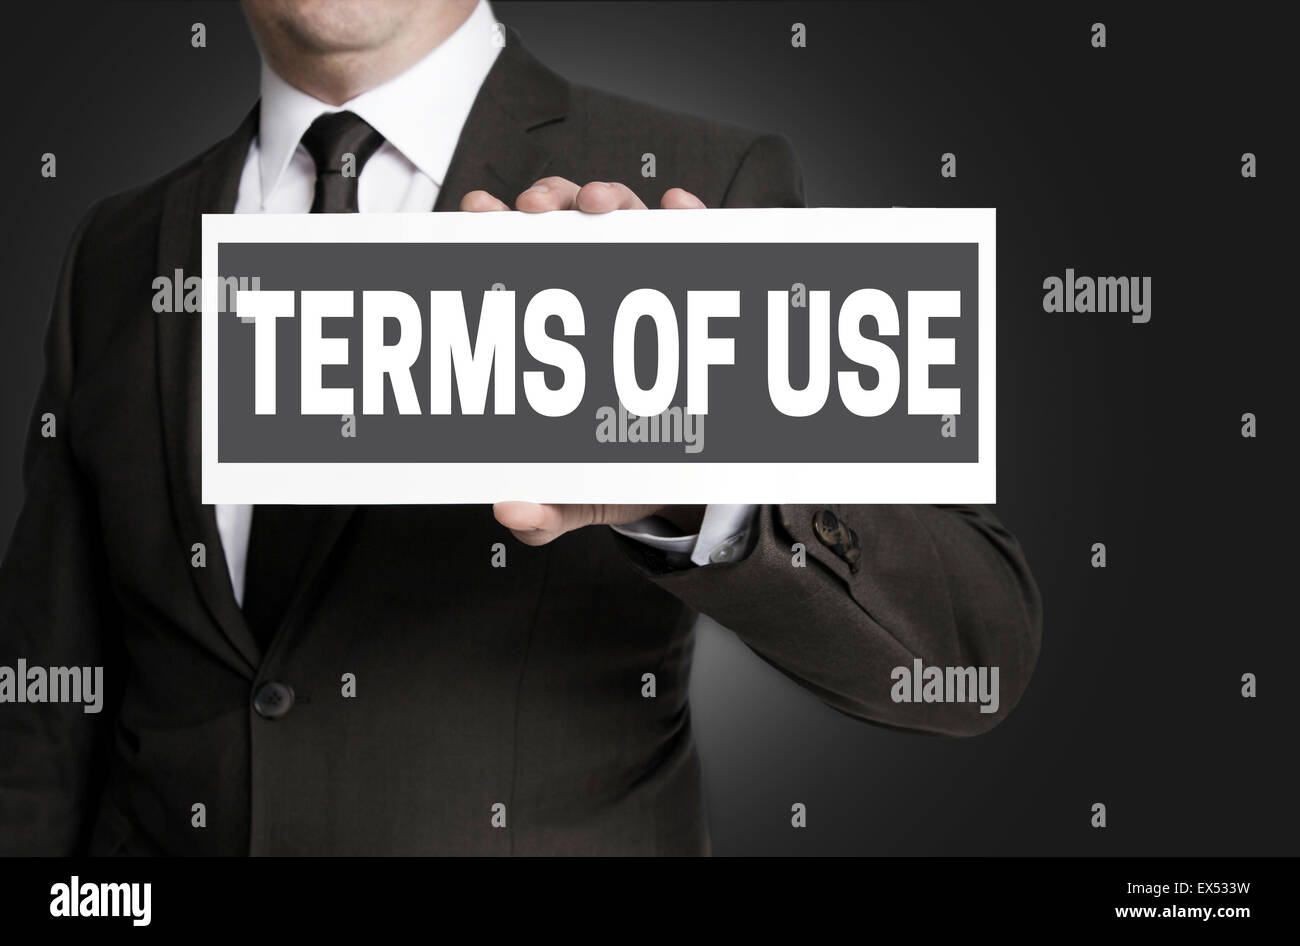 Terms of Use sign is held by businessman. Stock Photo